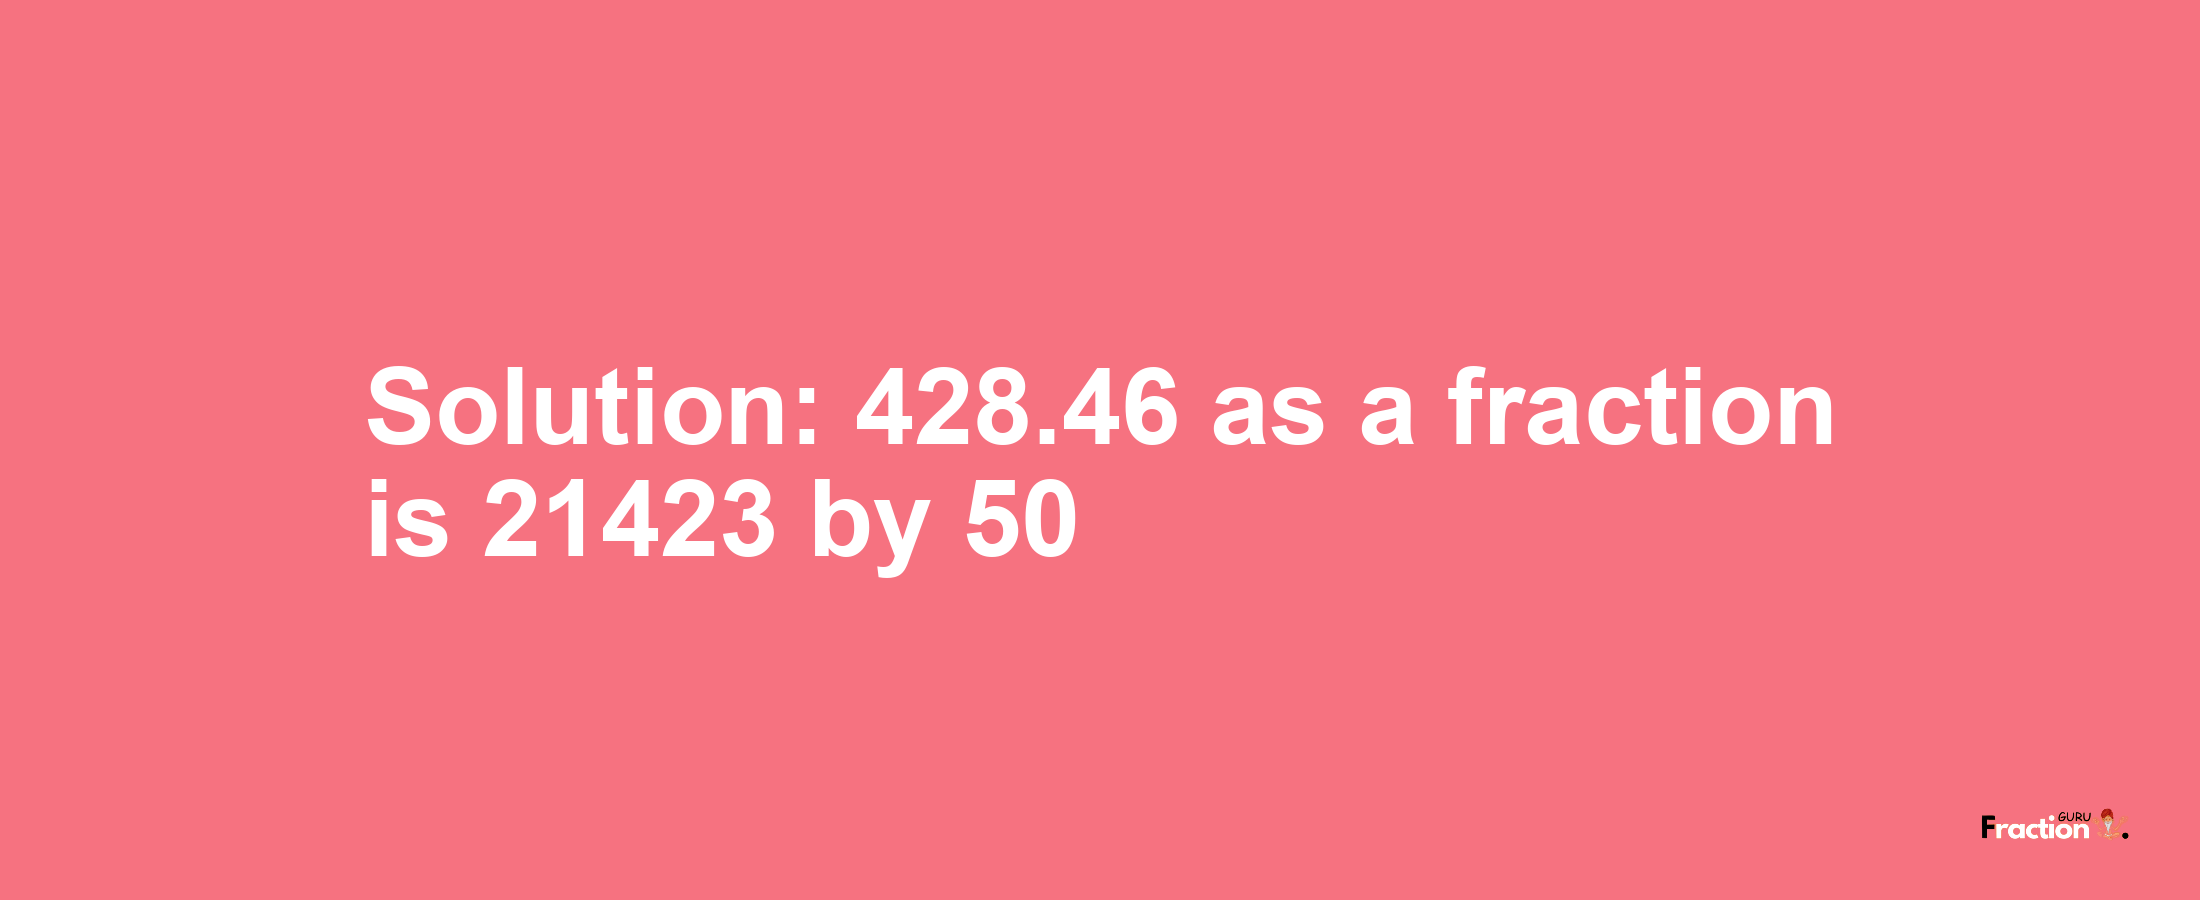 Solution:428.46 as a fraction is 21423/50